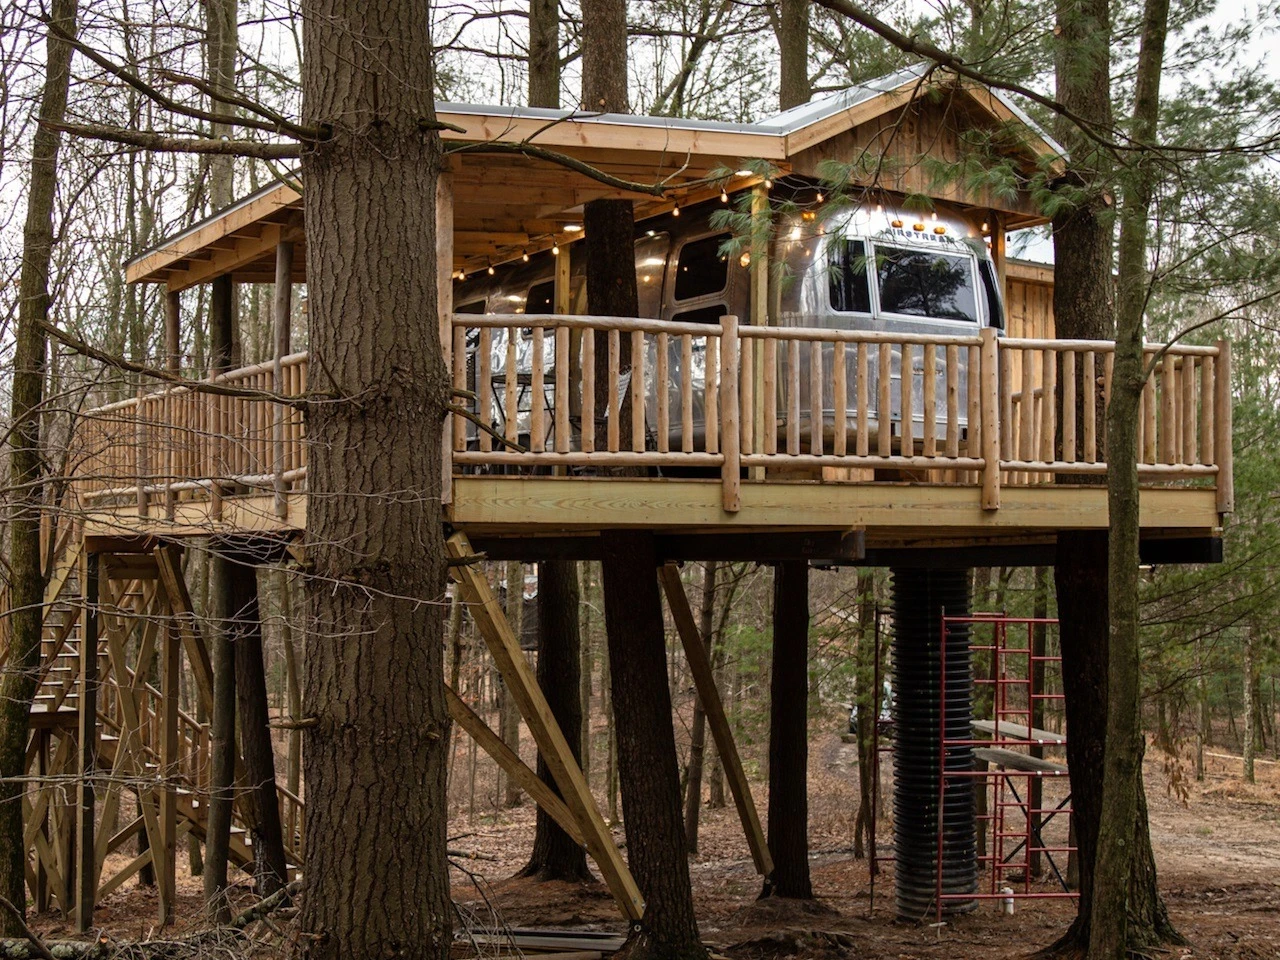 A treehouse with RV parked in it.